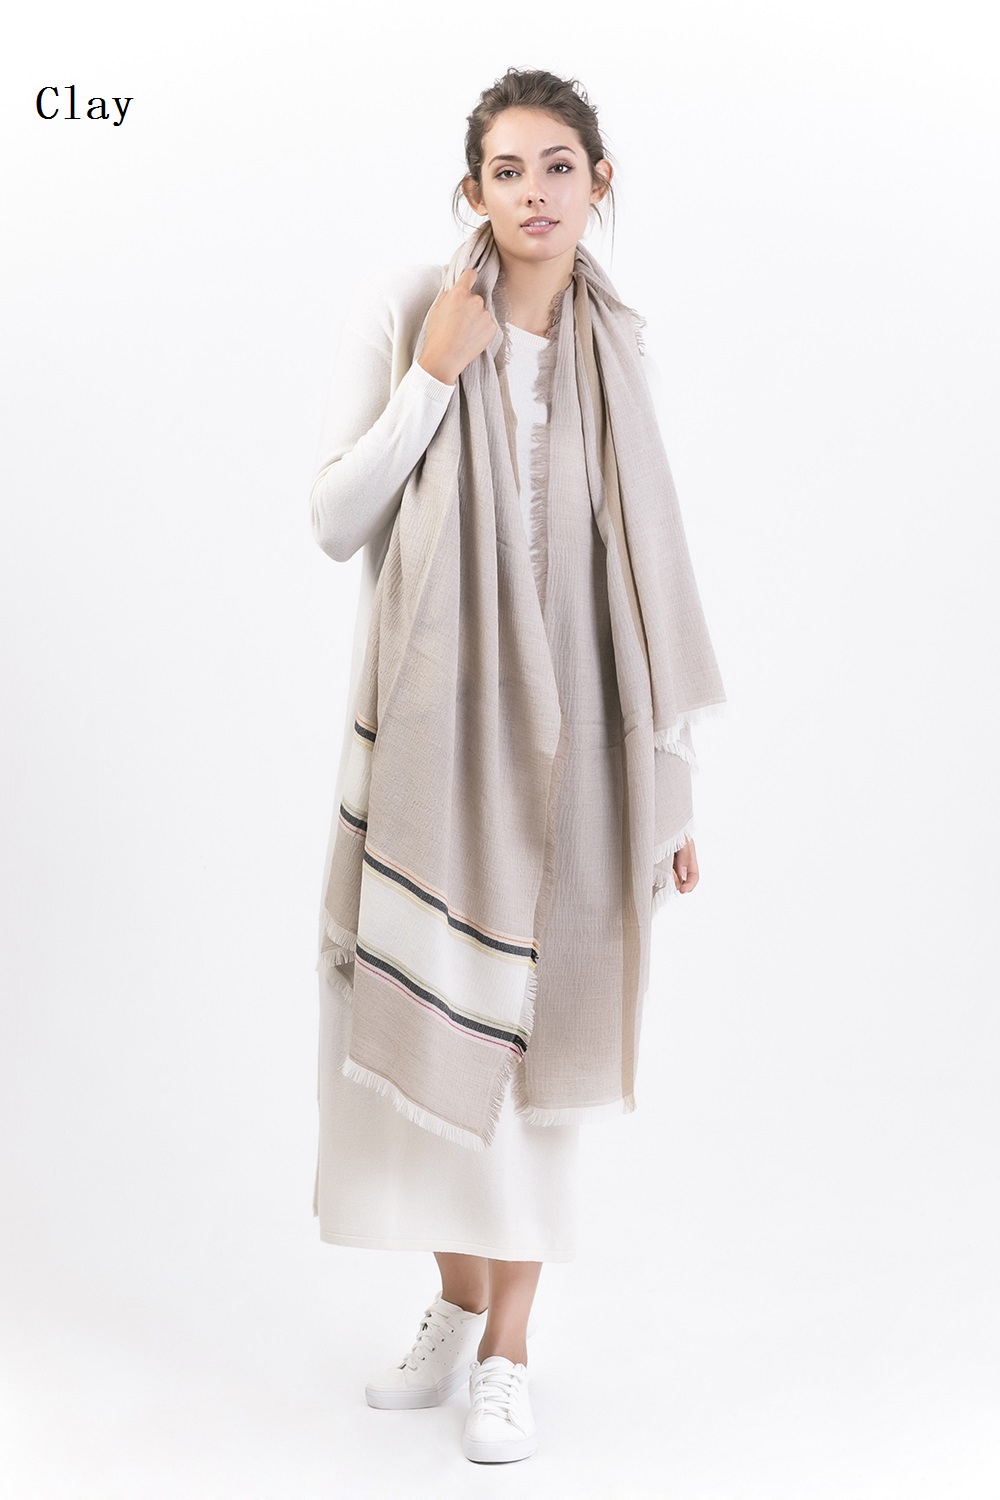 Clay-cashmere X-large shawl